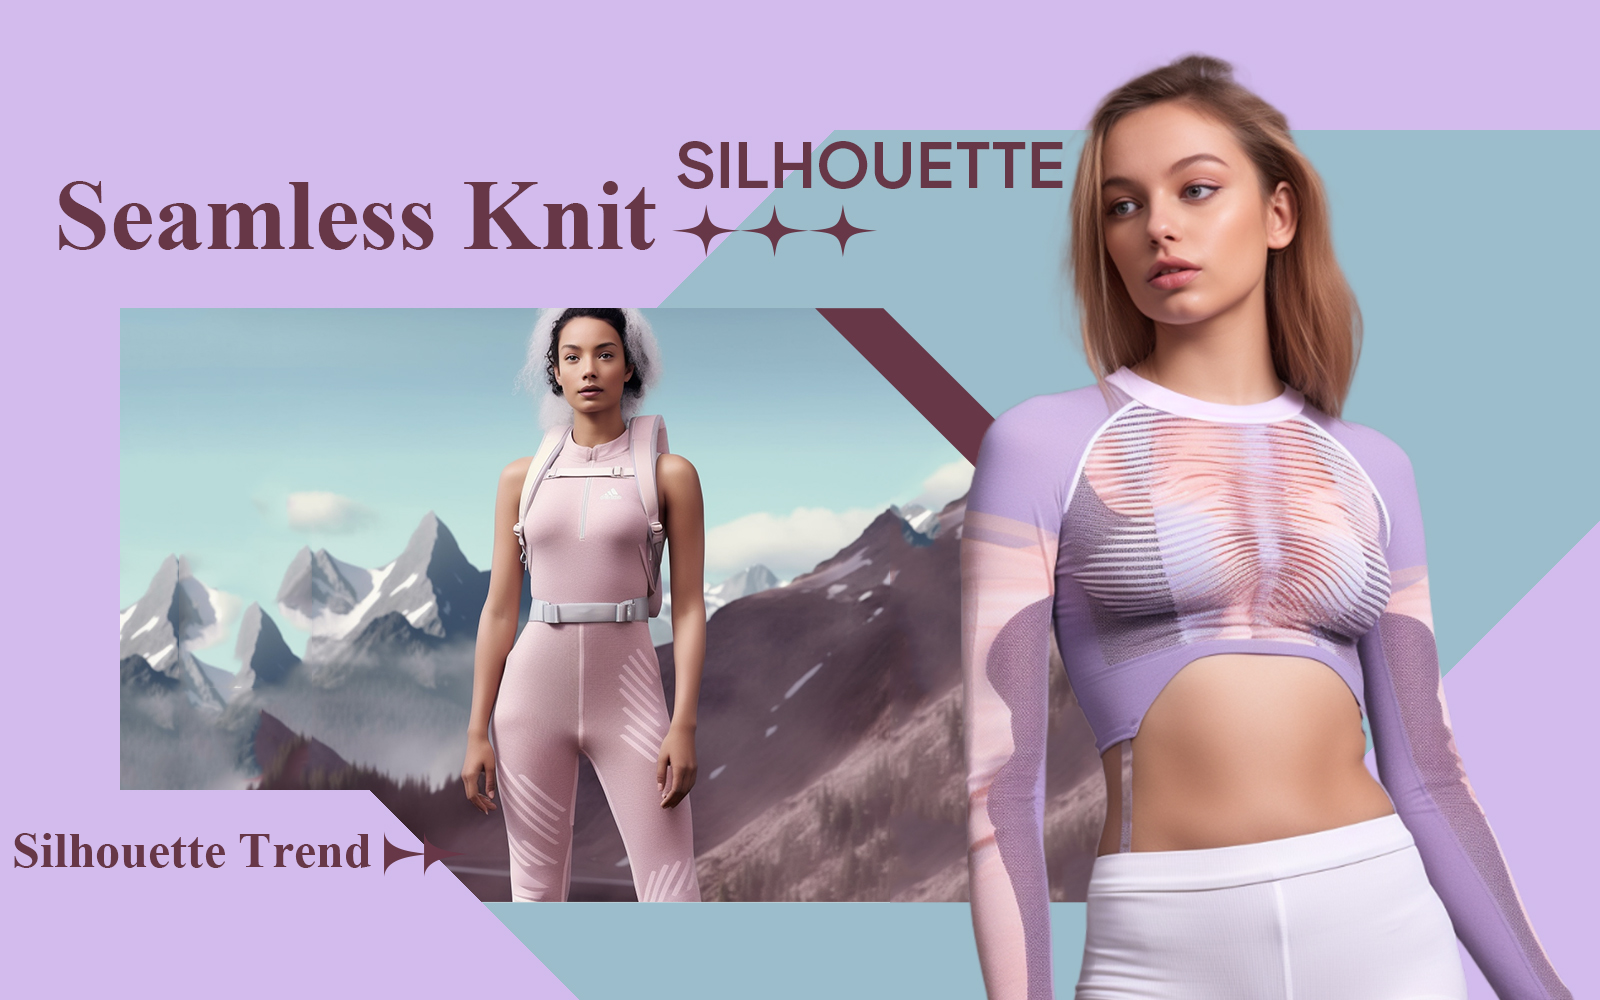 Seamless Knit -- The Silhouette Trend for Yogawear